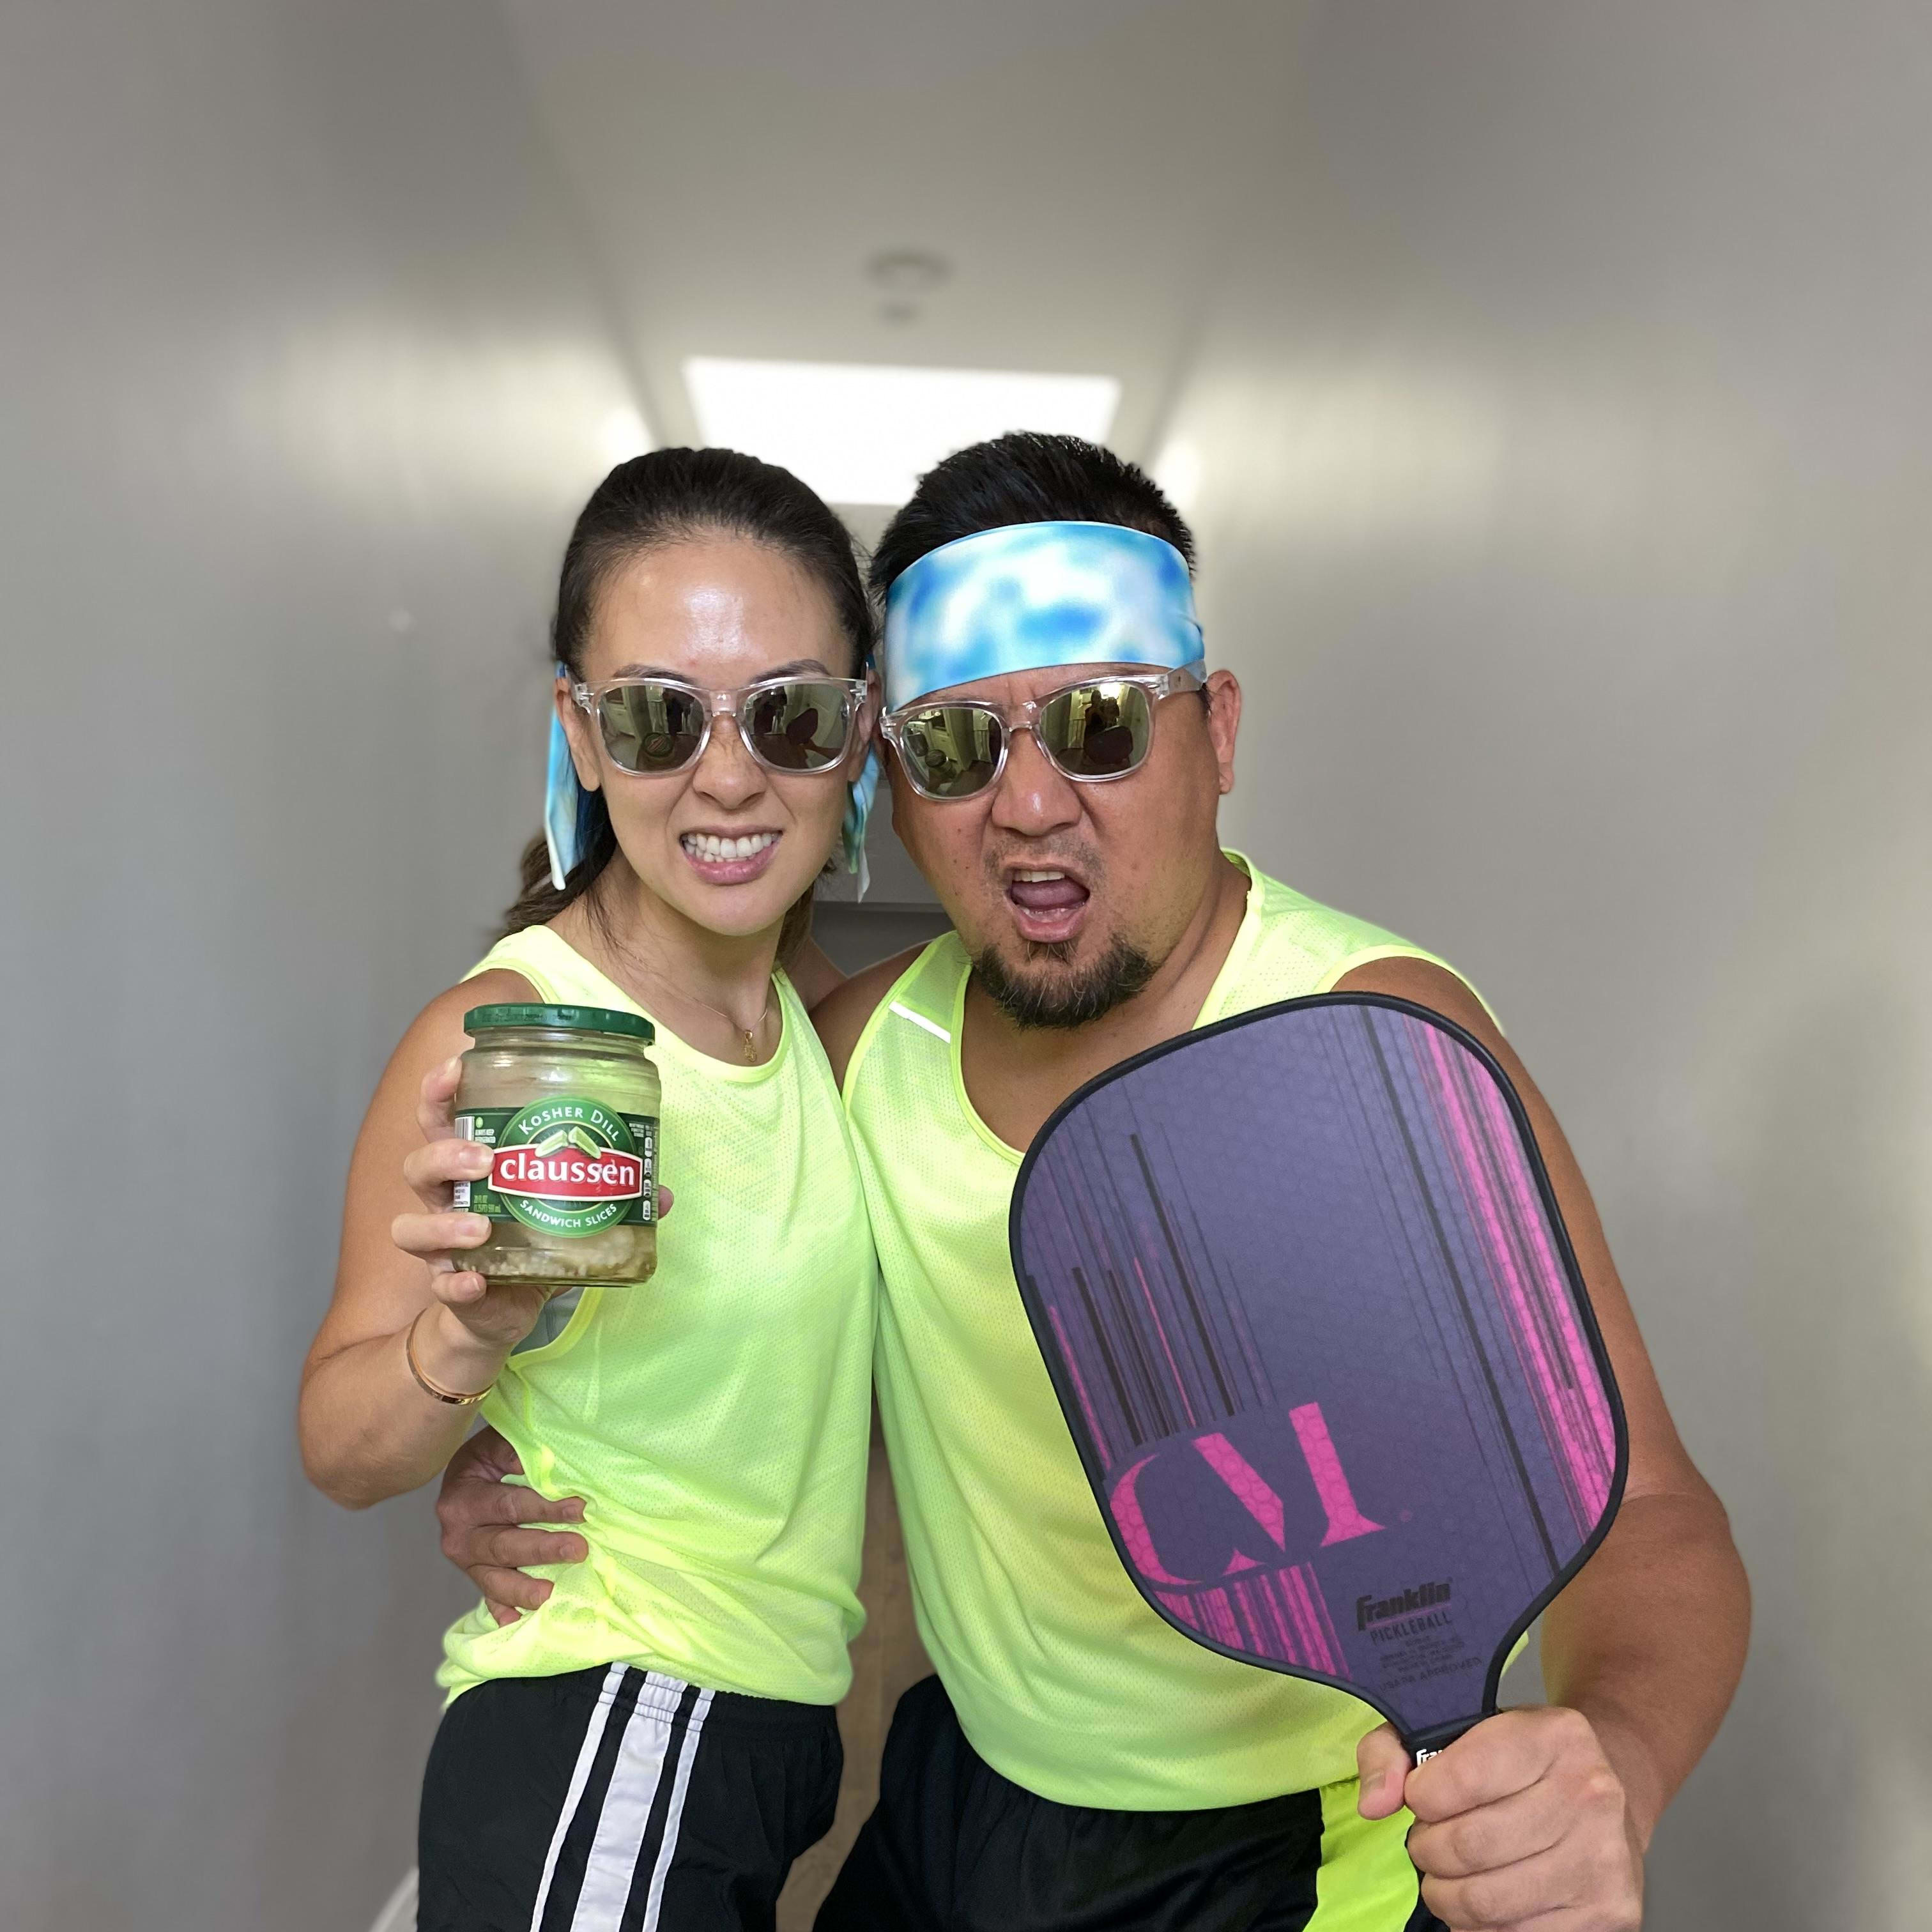 The Top Pickleball Players to Watch: Player Profiles and Rankings